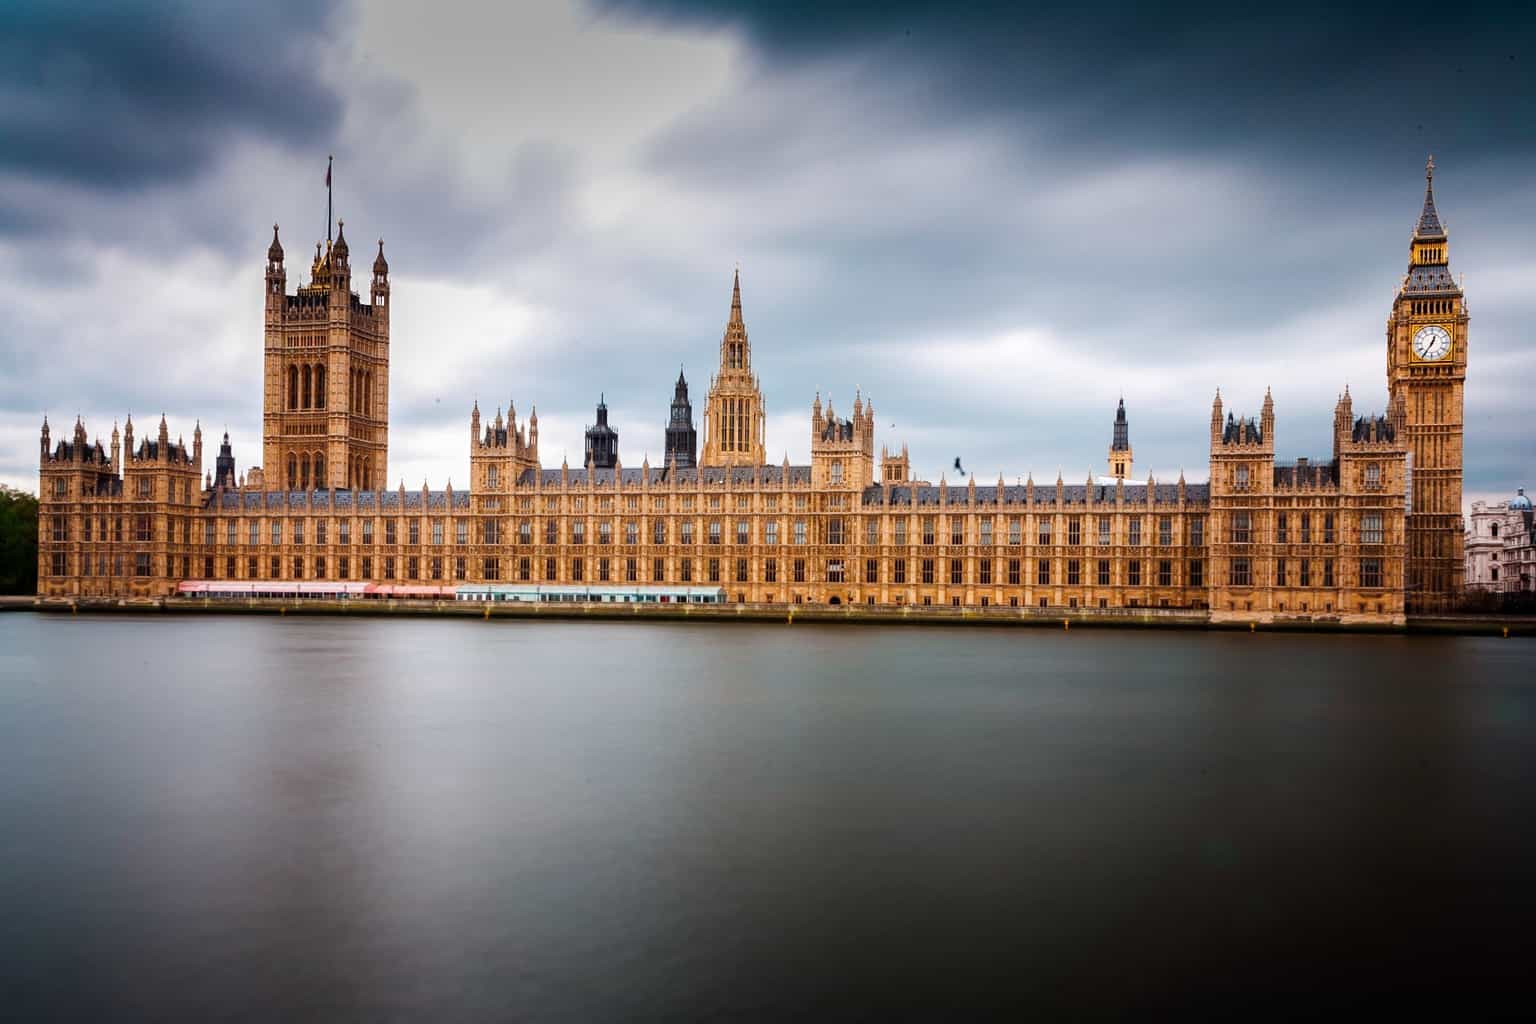  The Palace of Westminster, London 